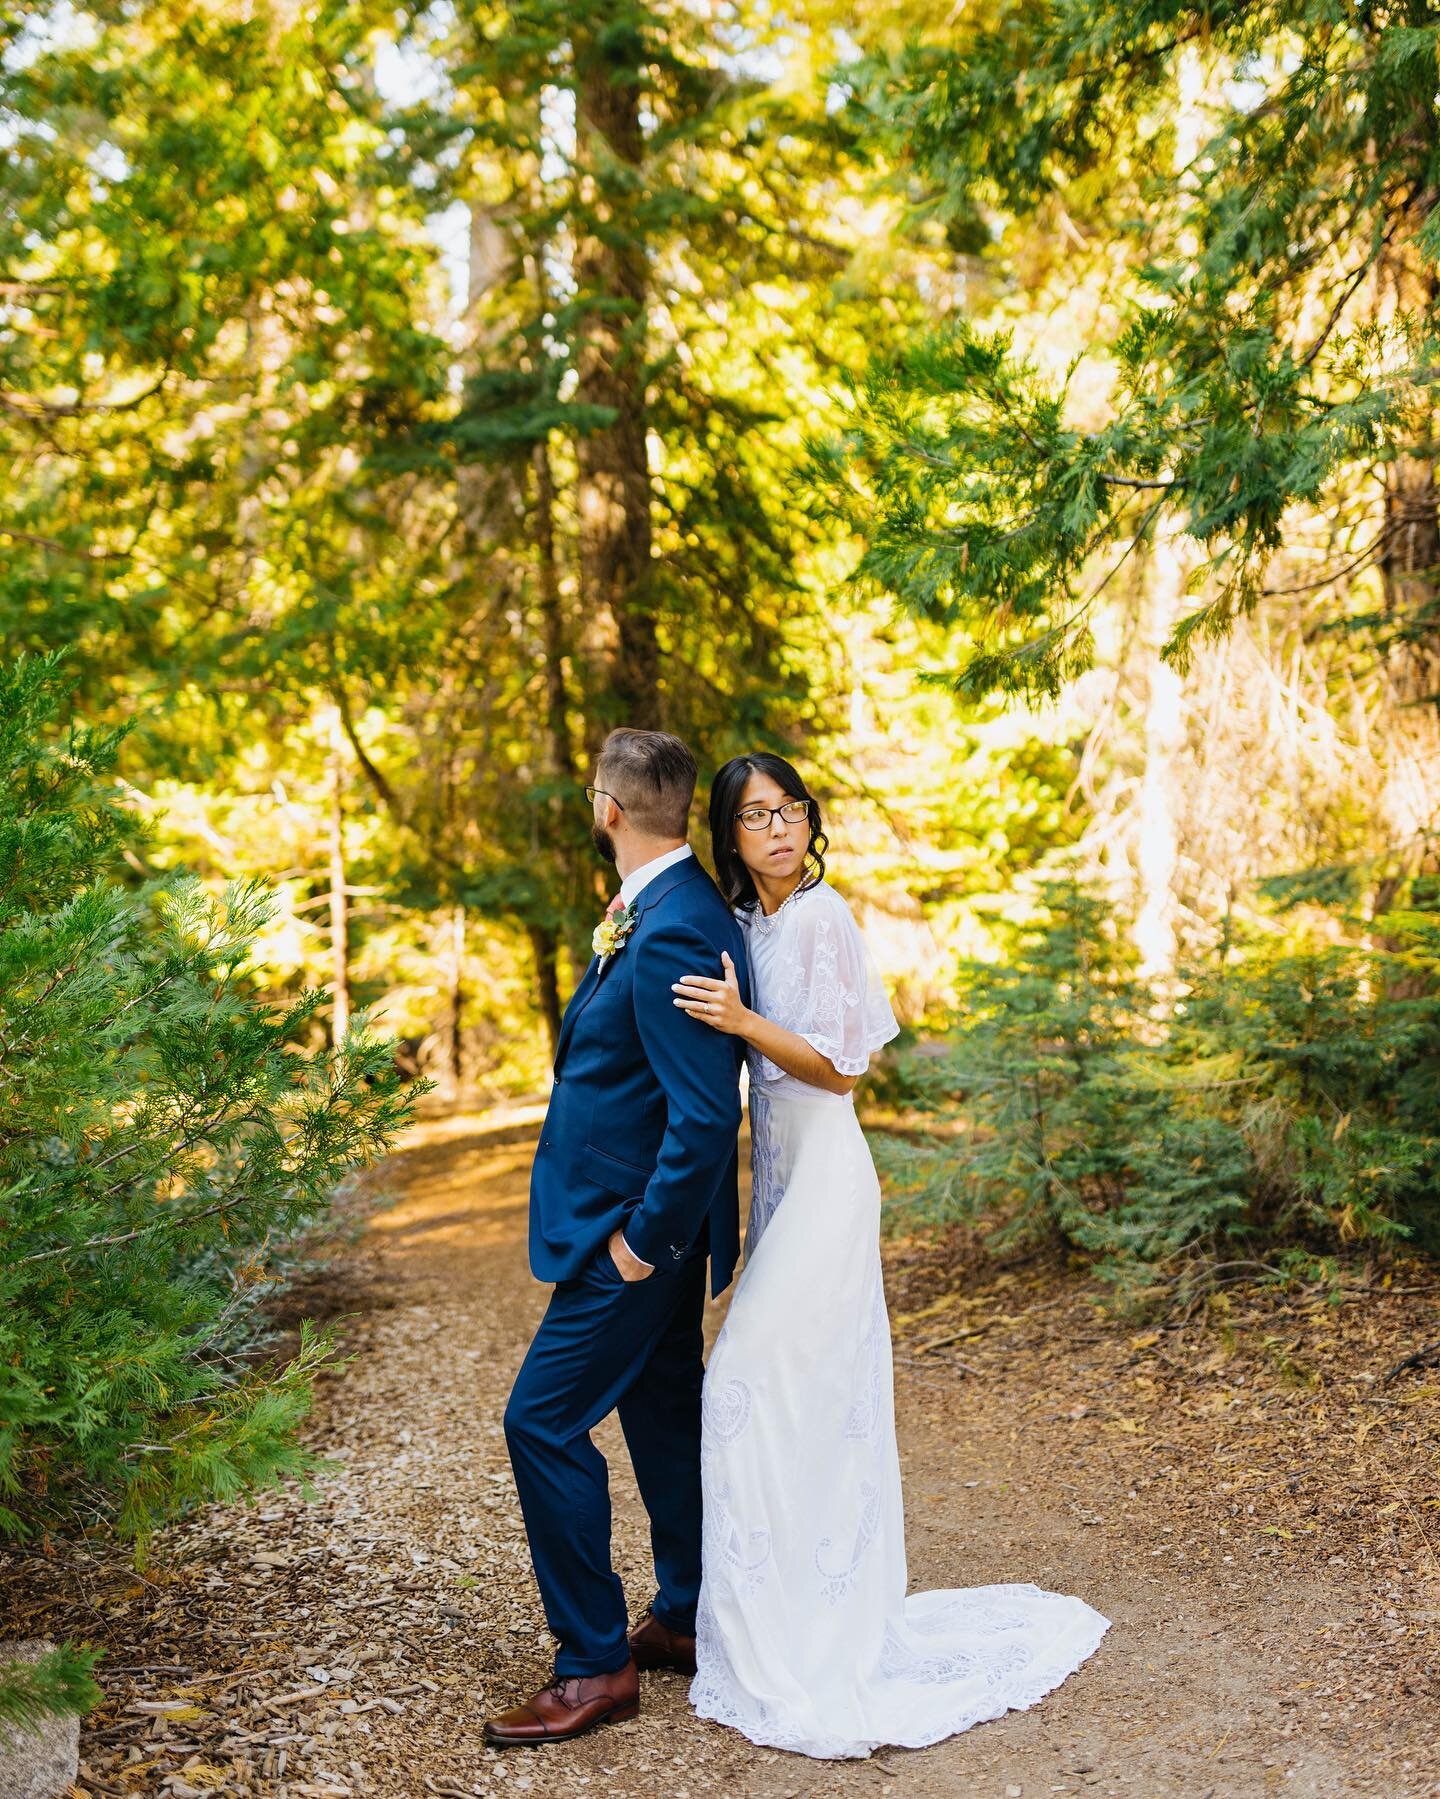 Benjamin + Megan&rsquo;s elopement near Yosemite 🌿 I just seriously love how magical the forest can make any photo feel✨